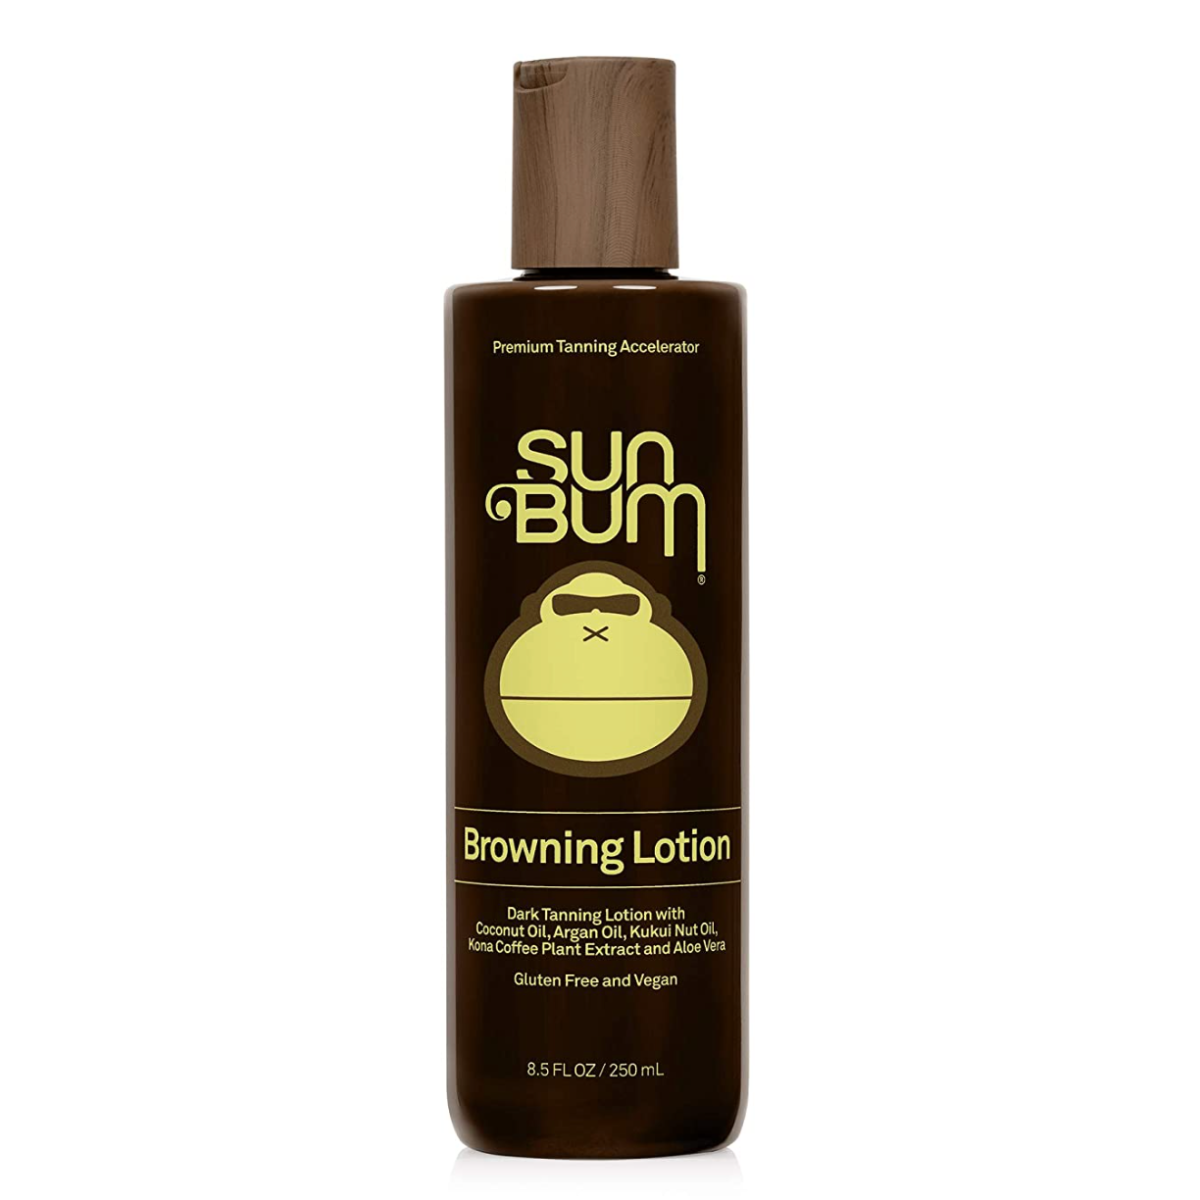 13 Tanning Bed & Tan Accelerator Lotions to Help You Bronze Faster